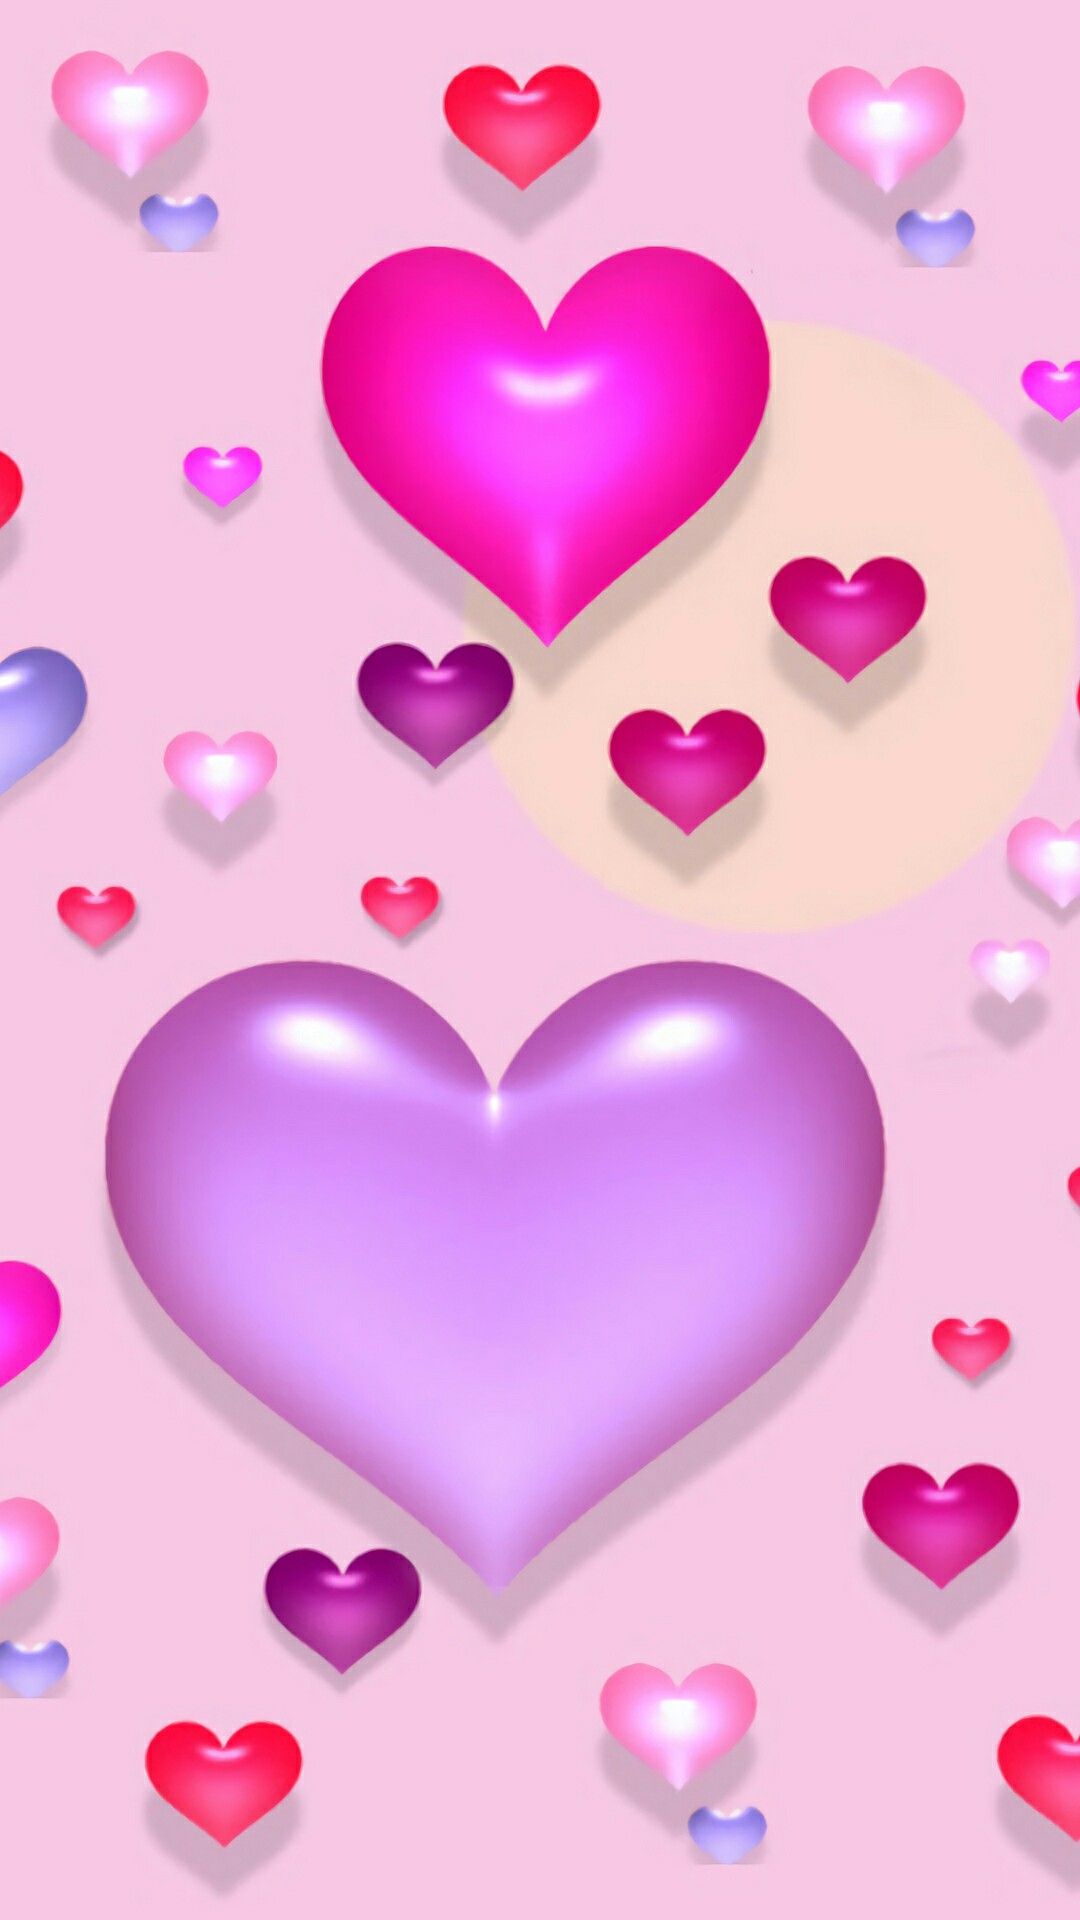 Pink and purple hearts. #cute #girlie #wallpaper. Valentines